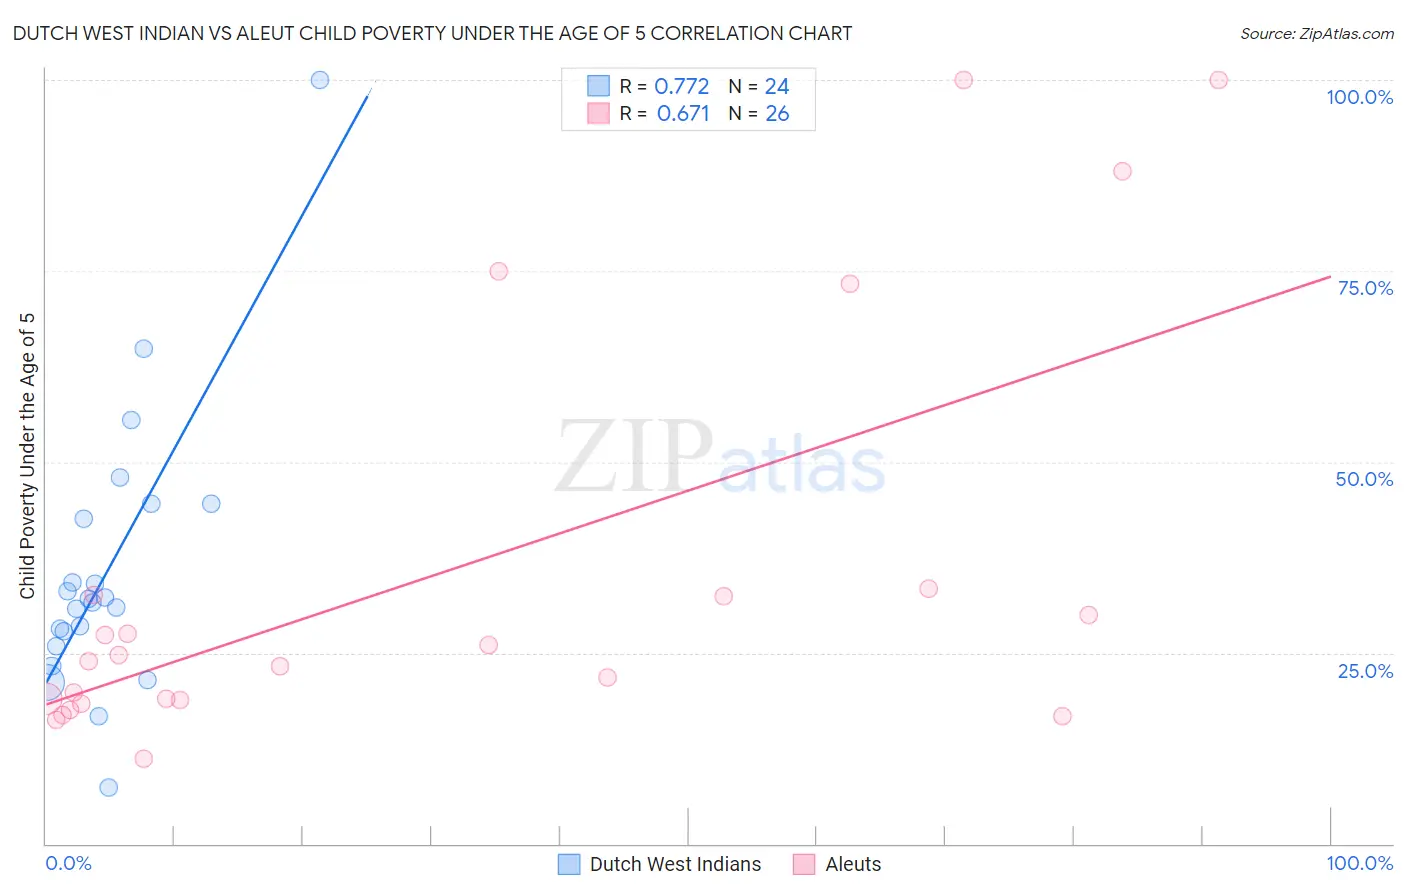 Dutch West Indian vs Aleut Child Poverty Under the Age of 5